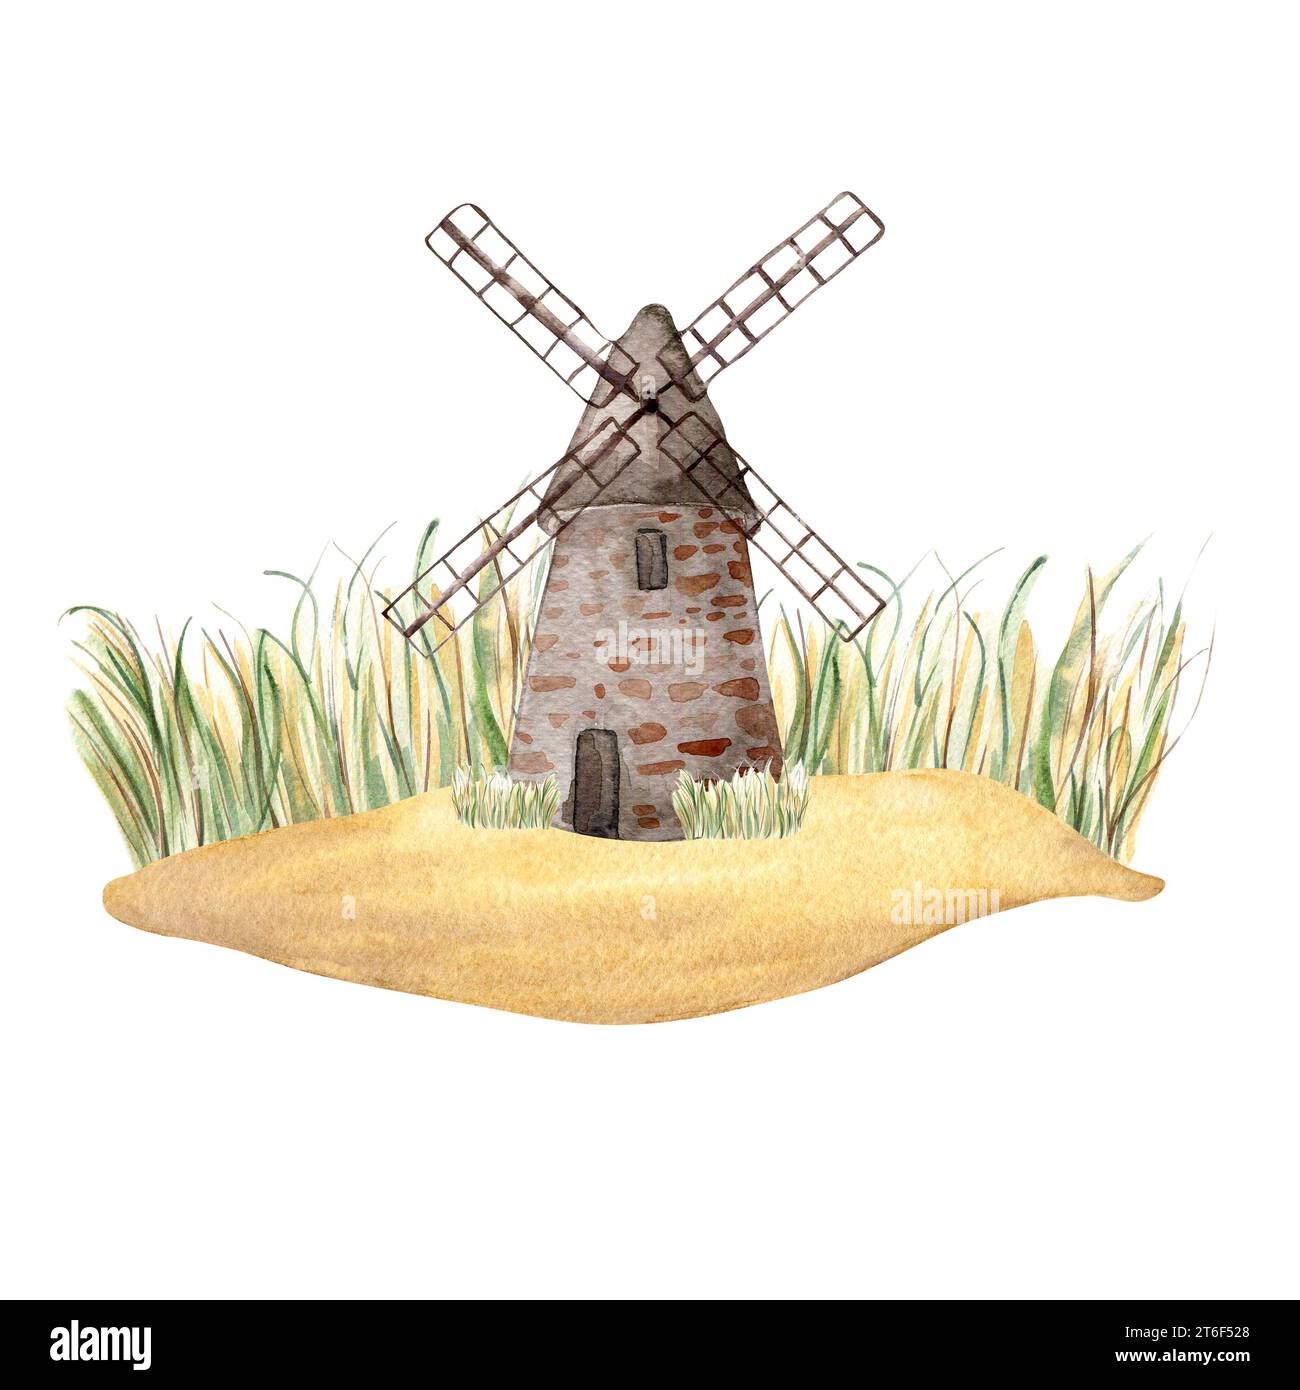 How to Draw a Wind Mill - YouTube